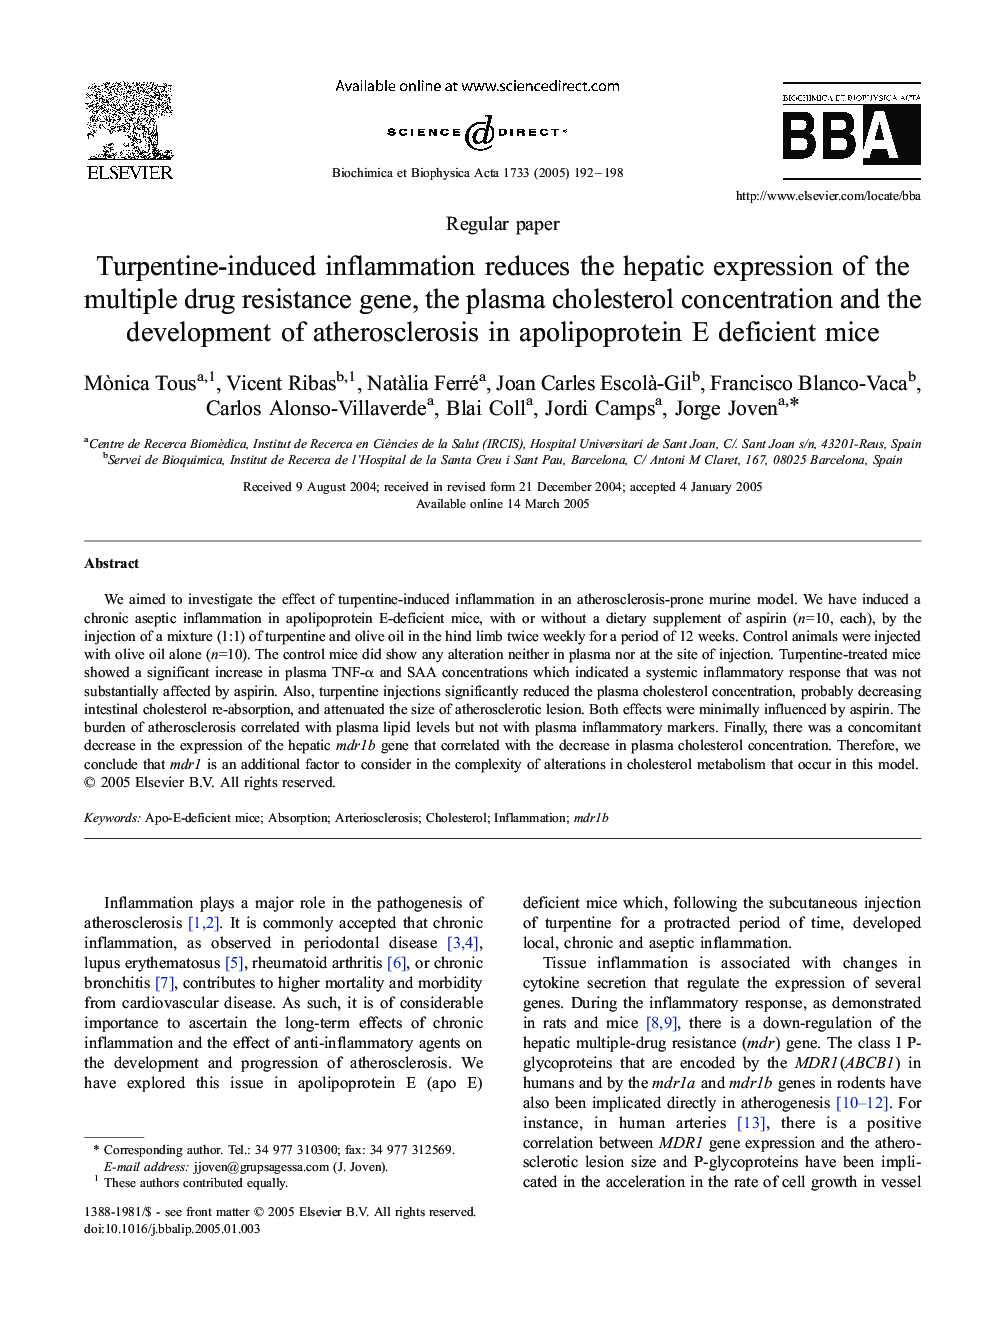 Turpentine-induced inflammation reduces the hepatic expression of the multiple drug resistance gene, the plasma cholesterol concentration and the development of atherosclerosis in apolipoprotein E deficient mice